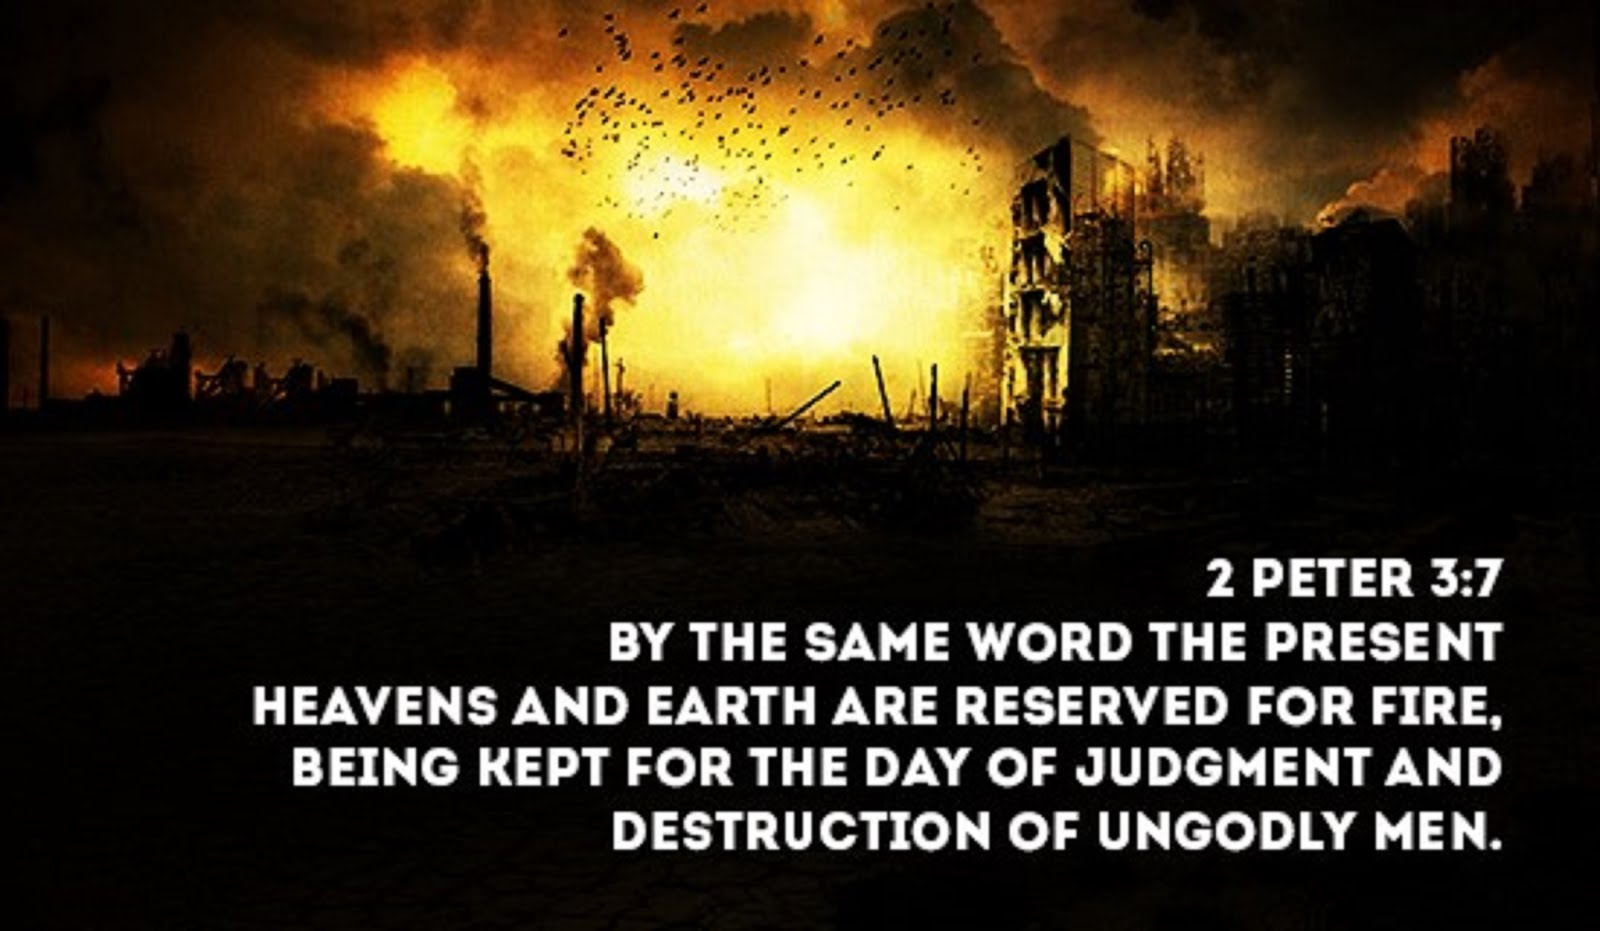 HEAVEN AND EARTH ARE RESERVED FOR DESTRUCTION BY FIRE.